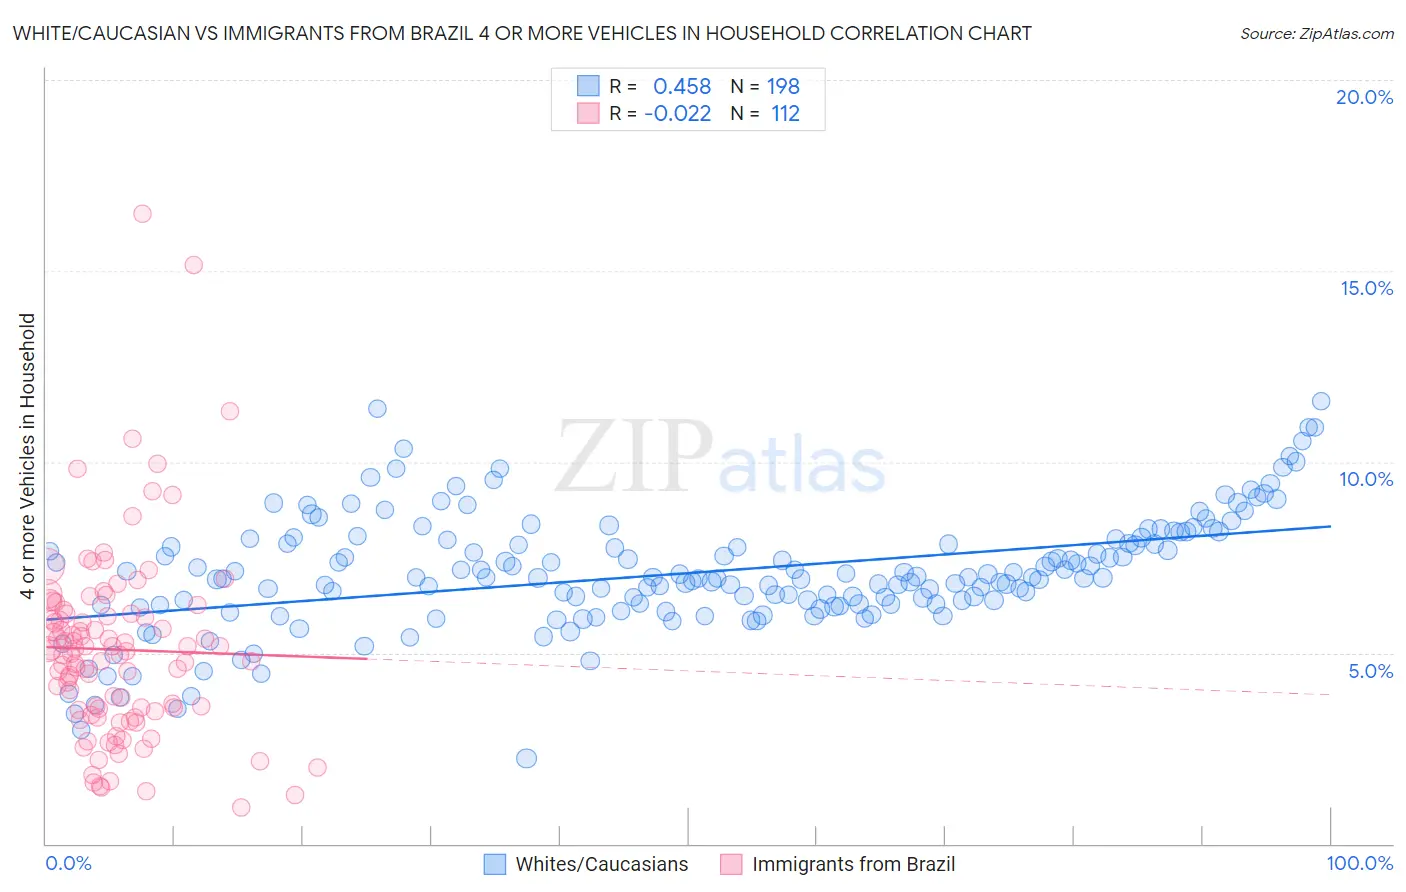 White/Caucasian vs Immigrants from Brazil 4 or more Vehicles in Household